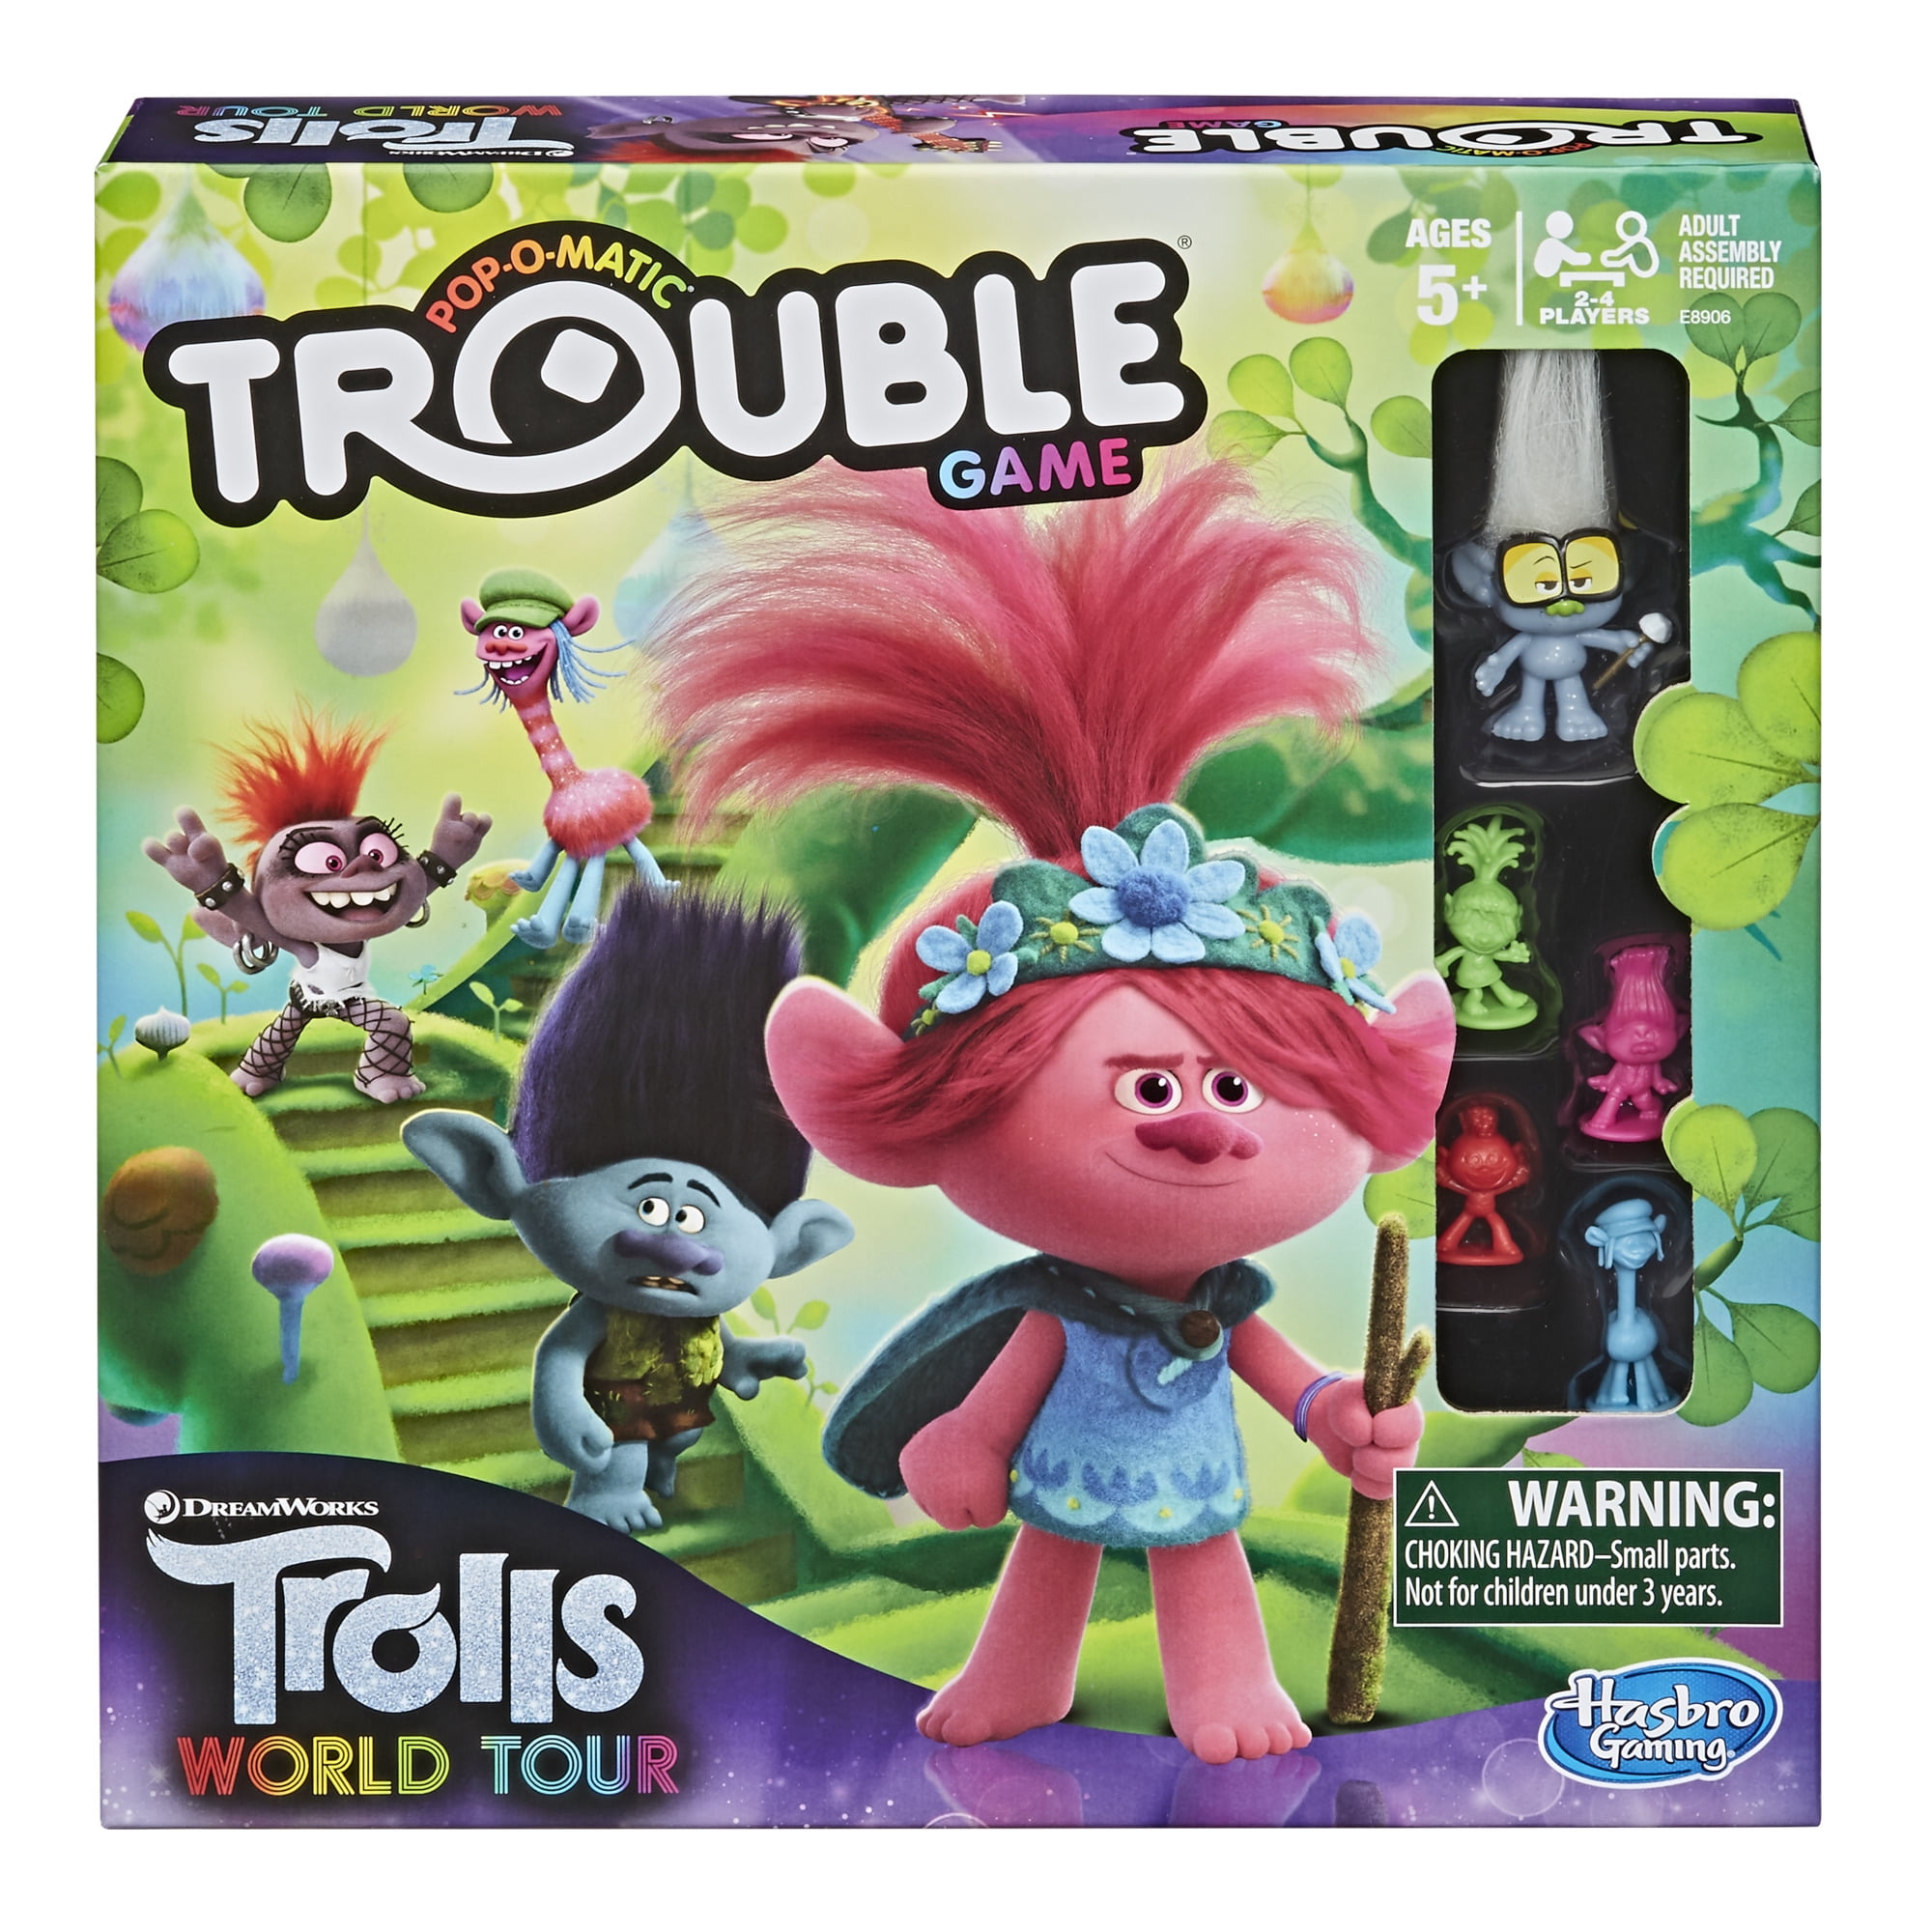 Monopoly Junior DreamWorks Trolls World Tour Edition Board Game for Kids Ages 5 and Up 